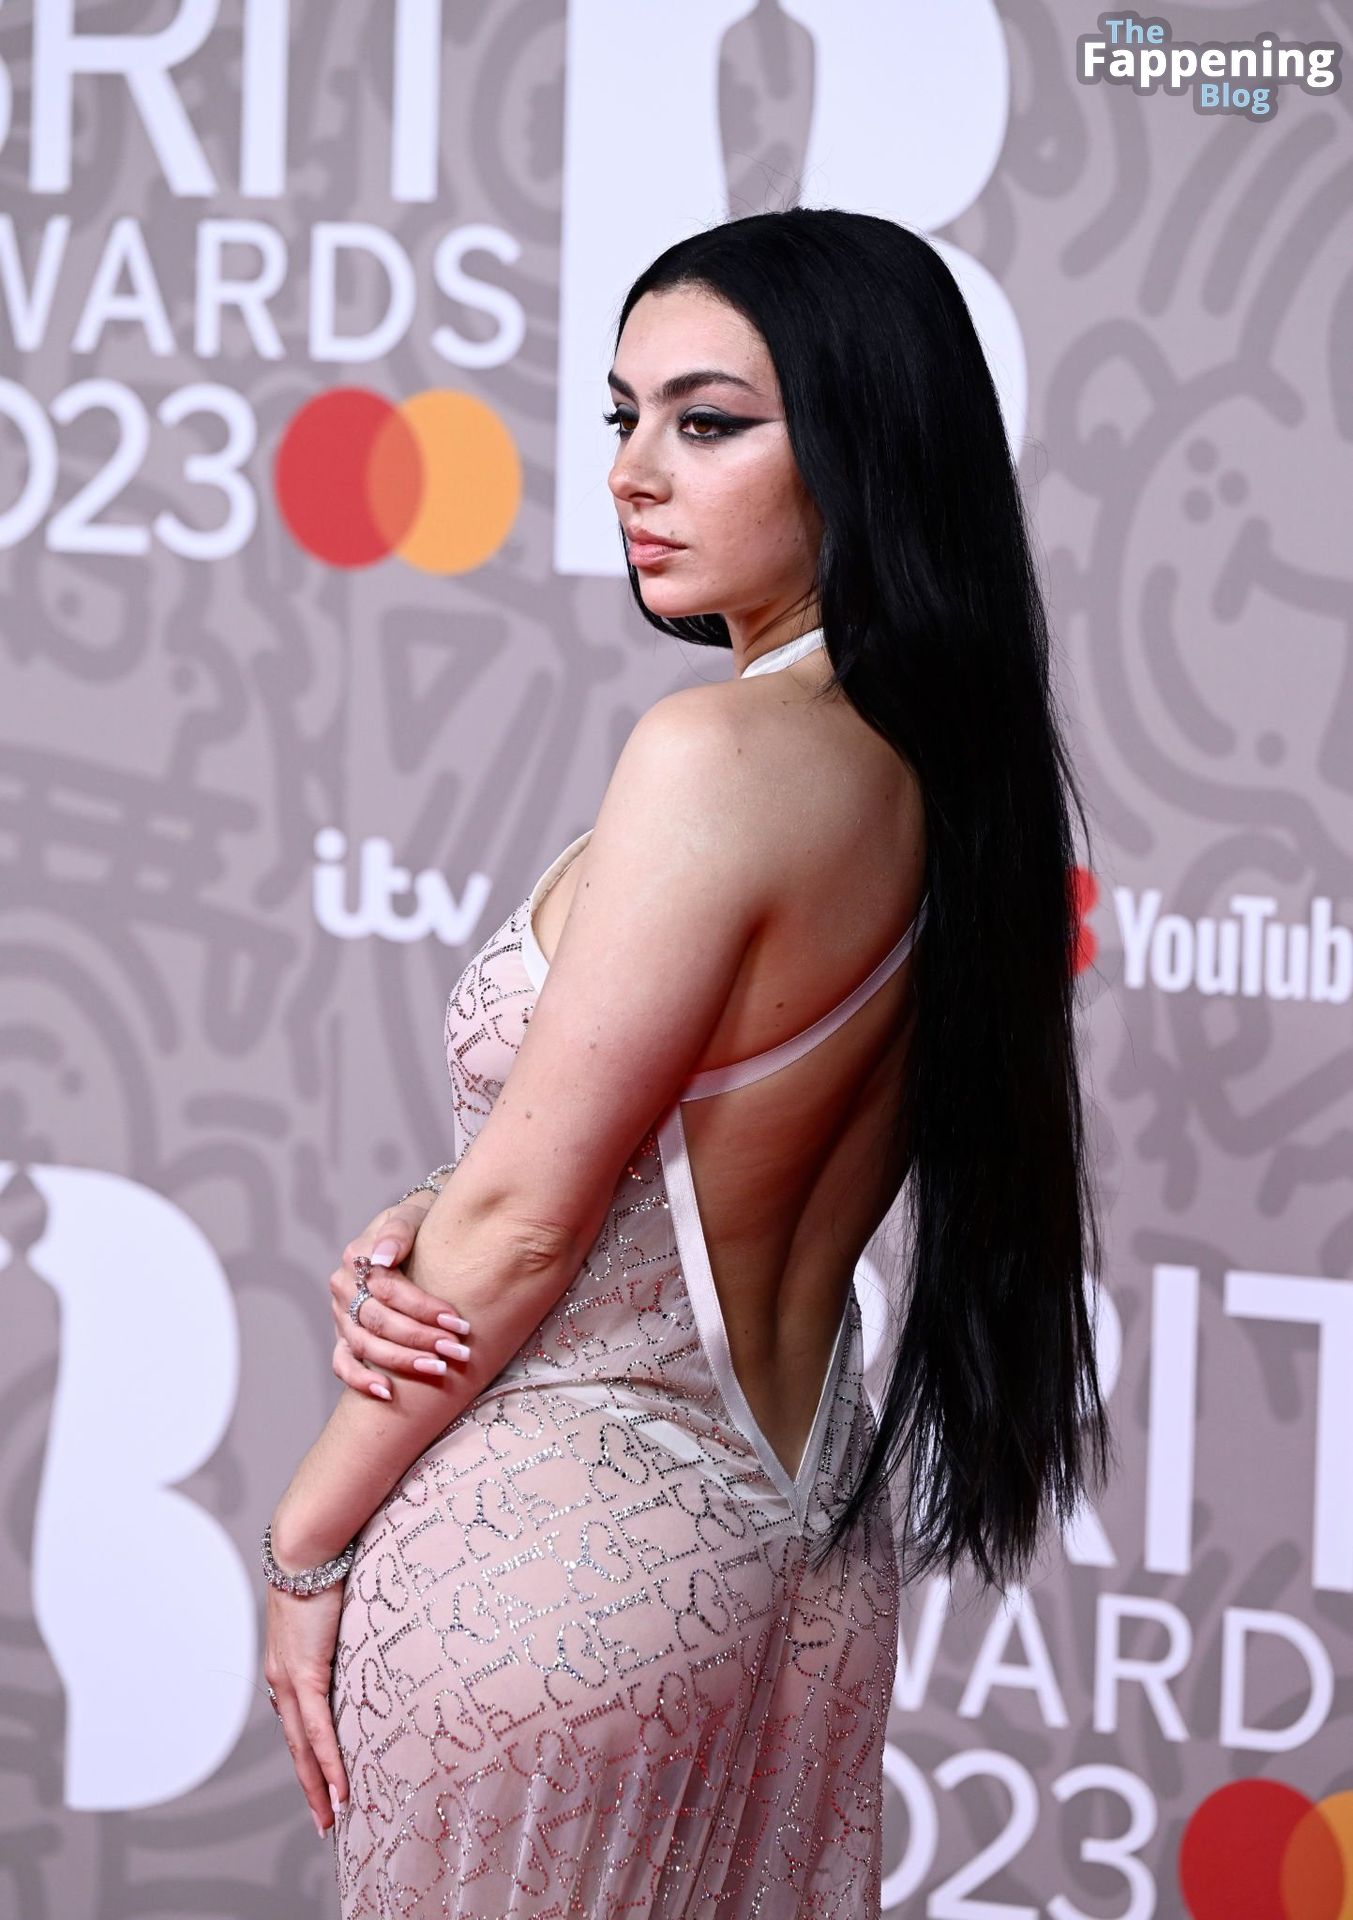 Charli-XCX-See-Through-Nudity-The-Fappening-Blog-73.jpg